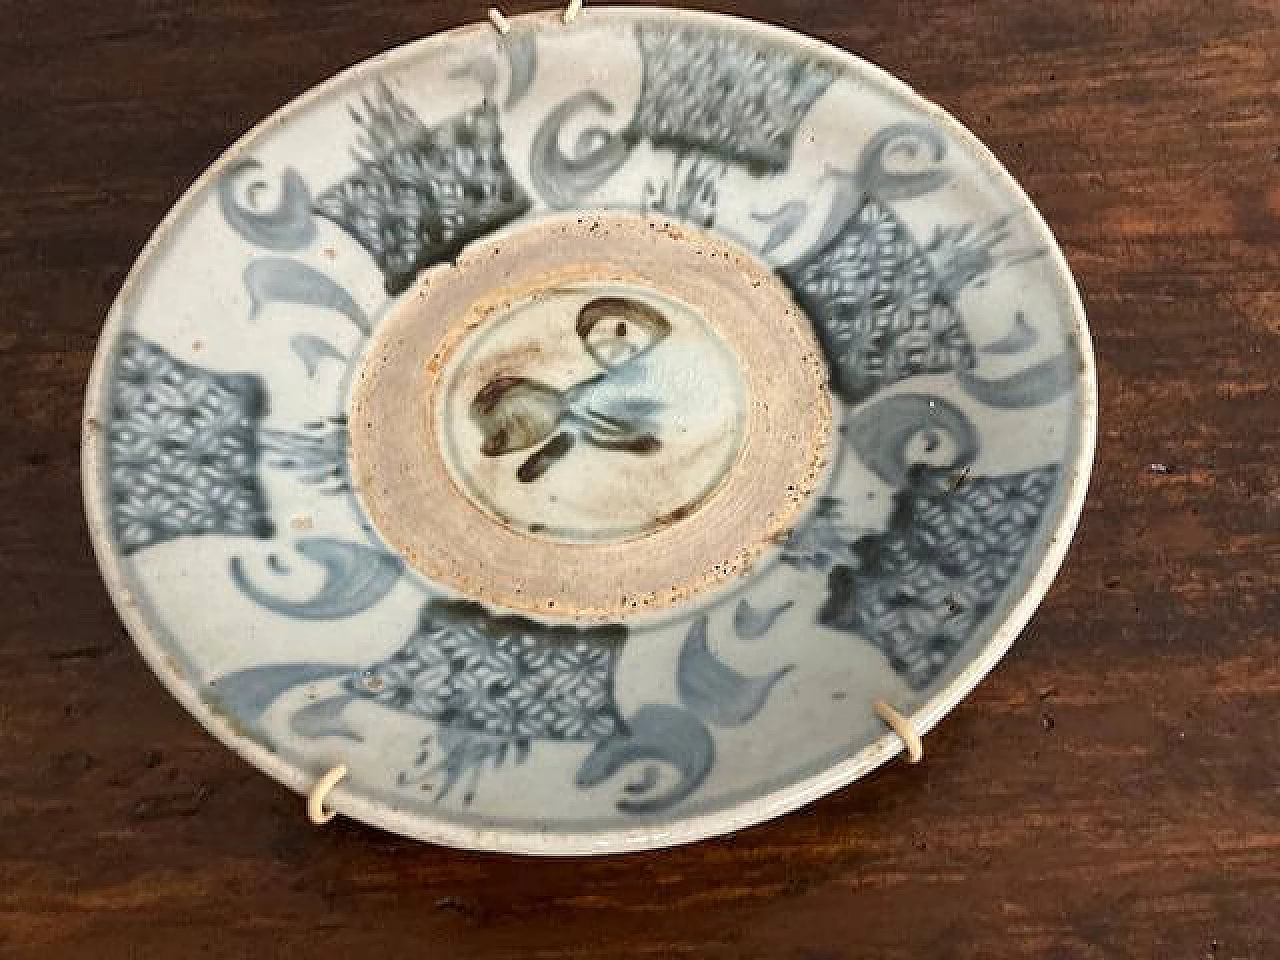 Ming dynasty Chinese porcelain plate, 18th century 2